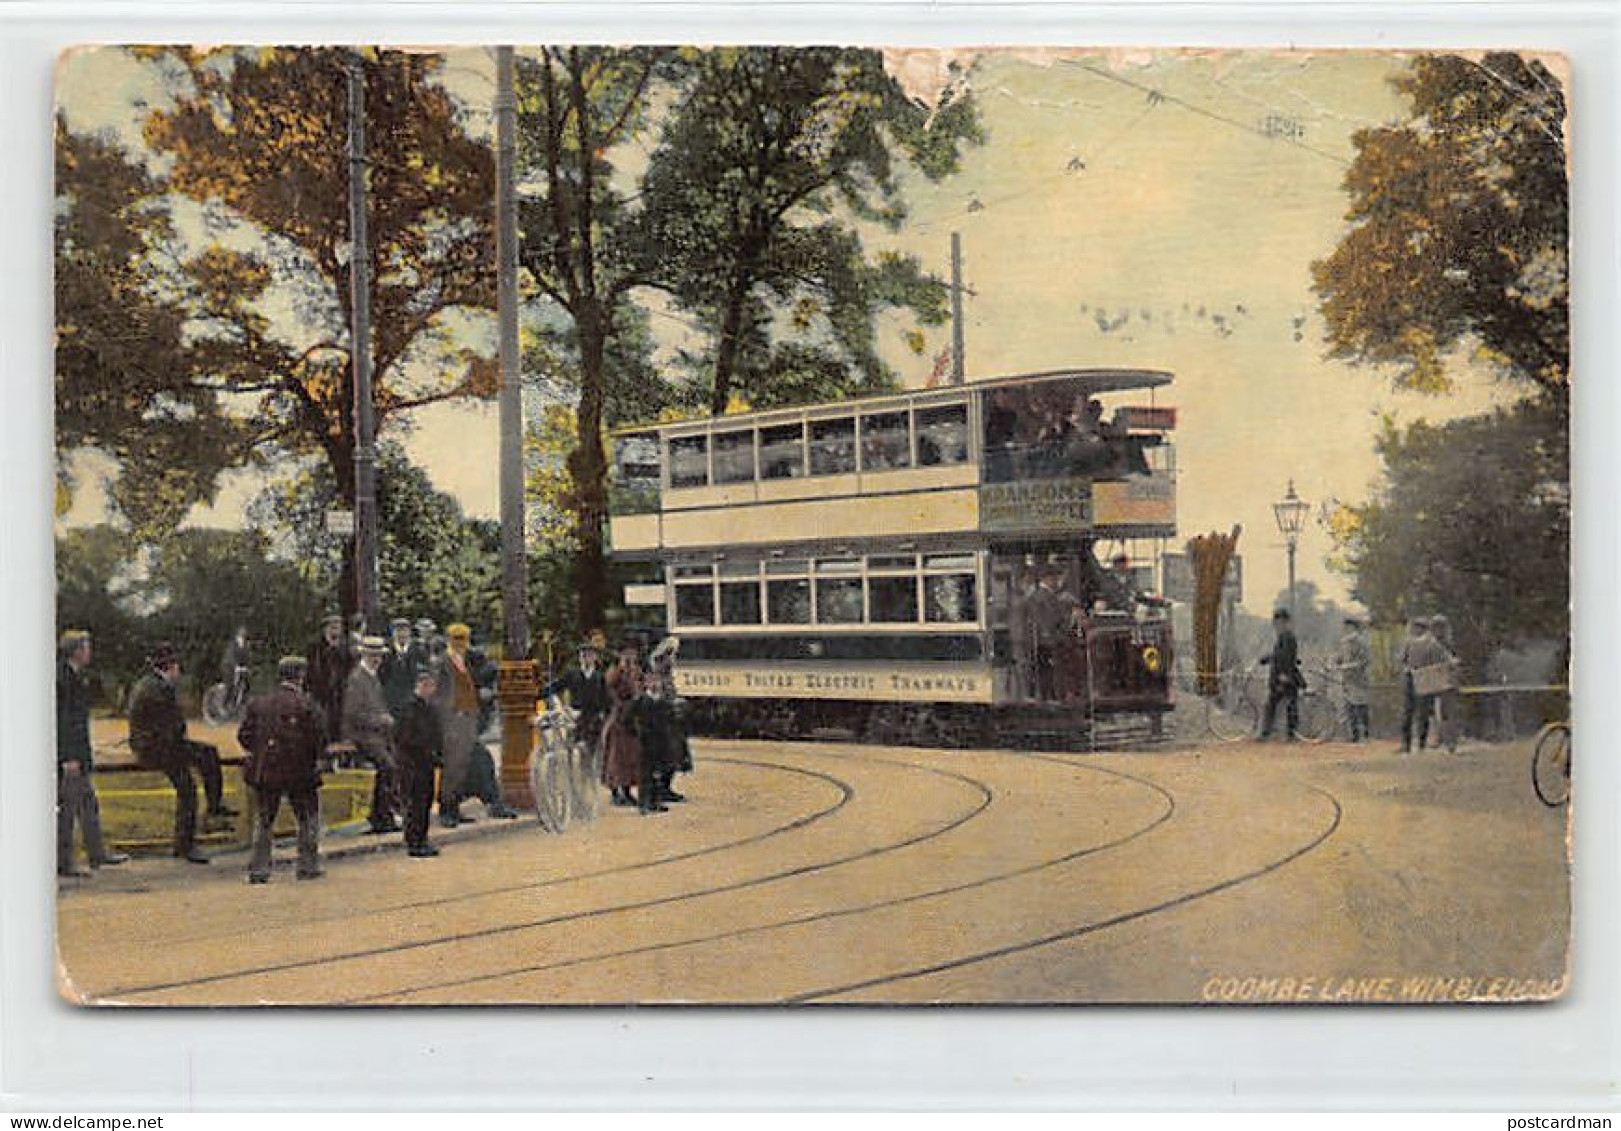 England - WIMBLEDON London - Coombe Lane - Tram - London United Electric Tramways - SEE SCANS FOR CONDITION - London Suburbs